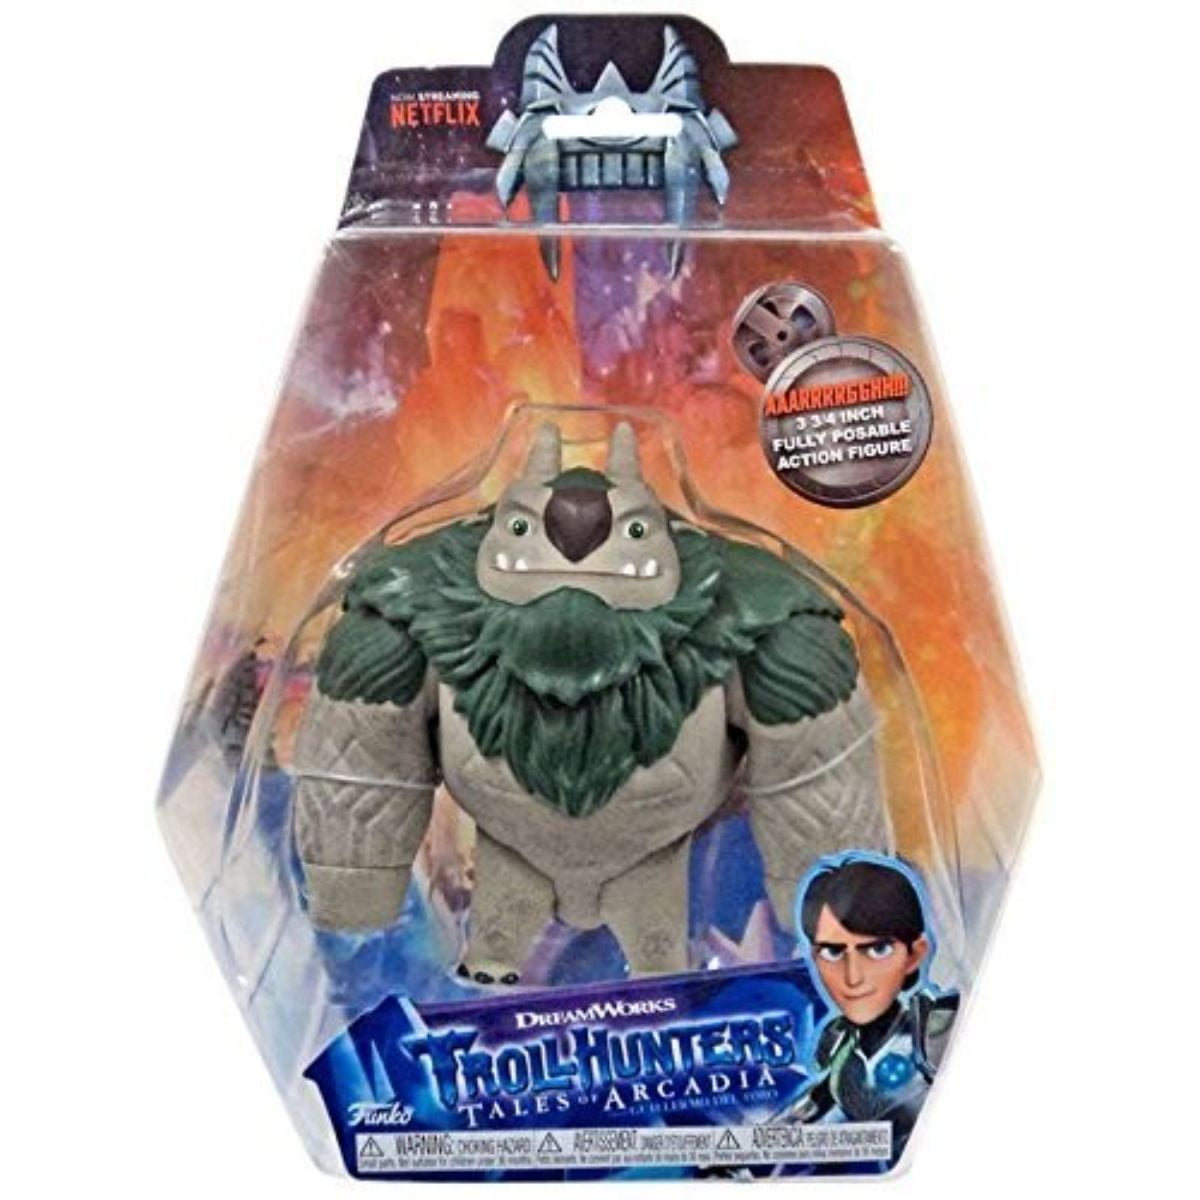 NEW Trollhunters BLINKY TOBY 3.75" Action Figure Figurine Posable Troll Hunters 